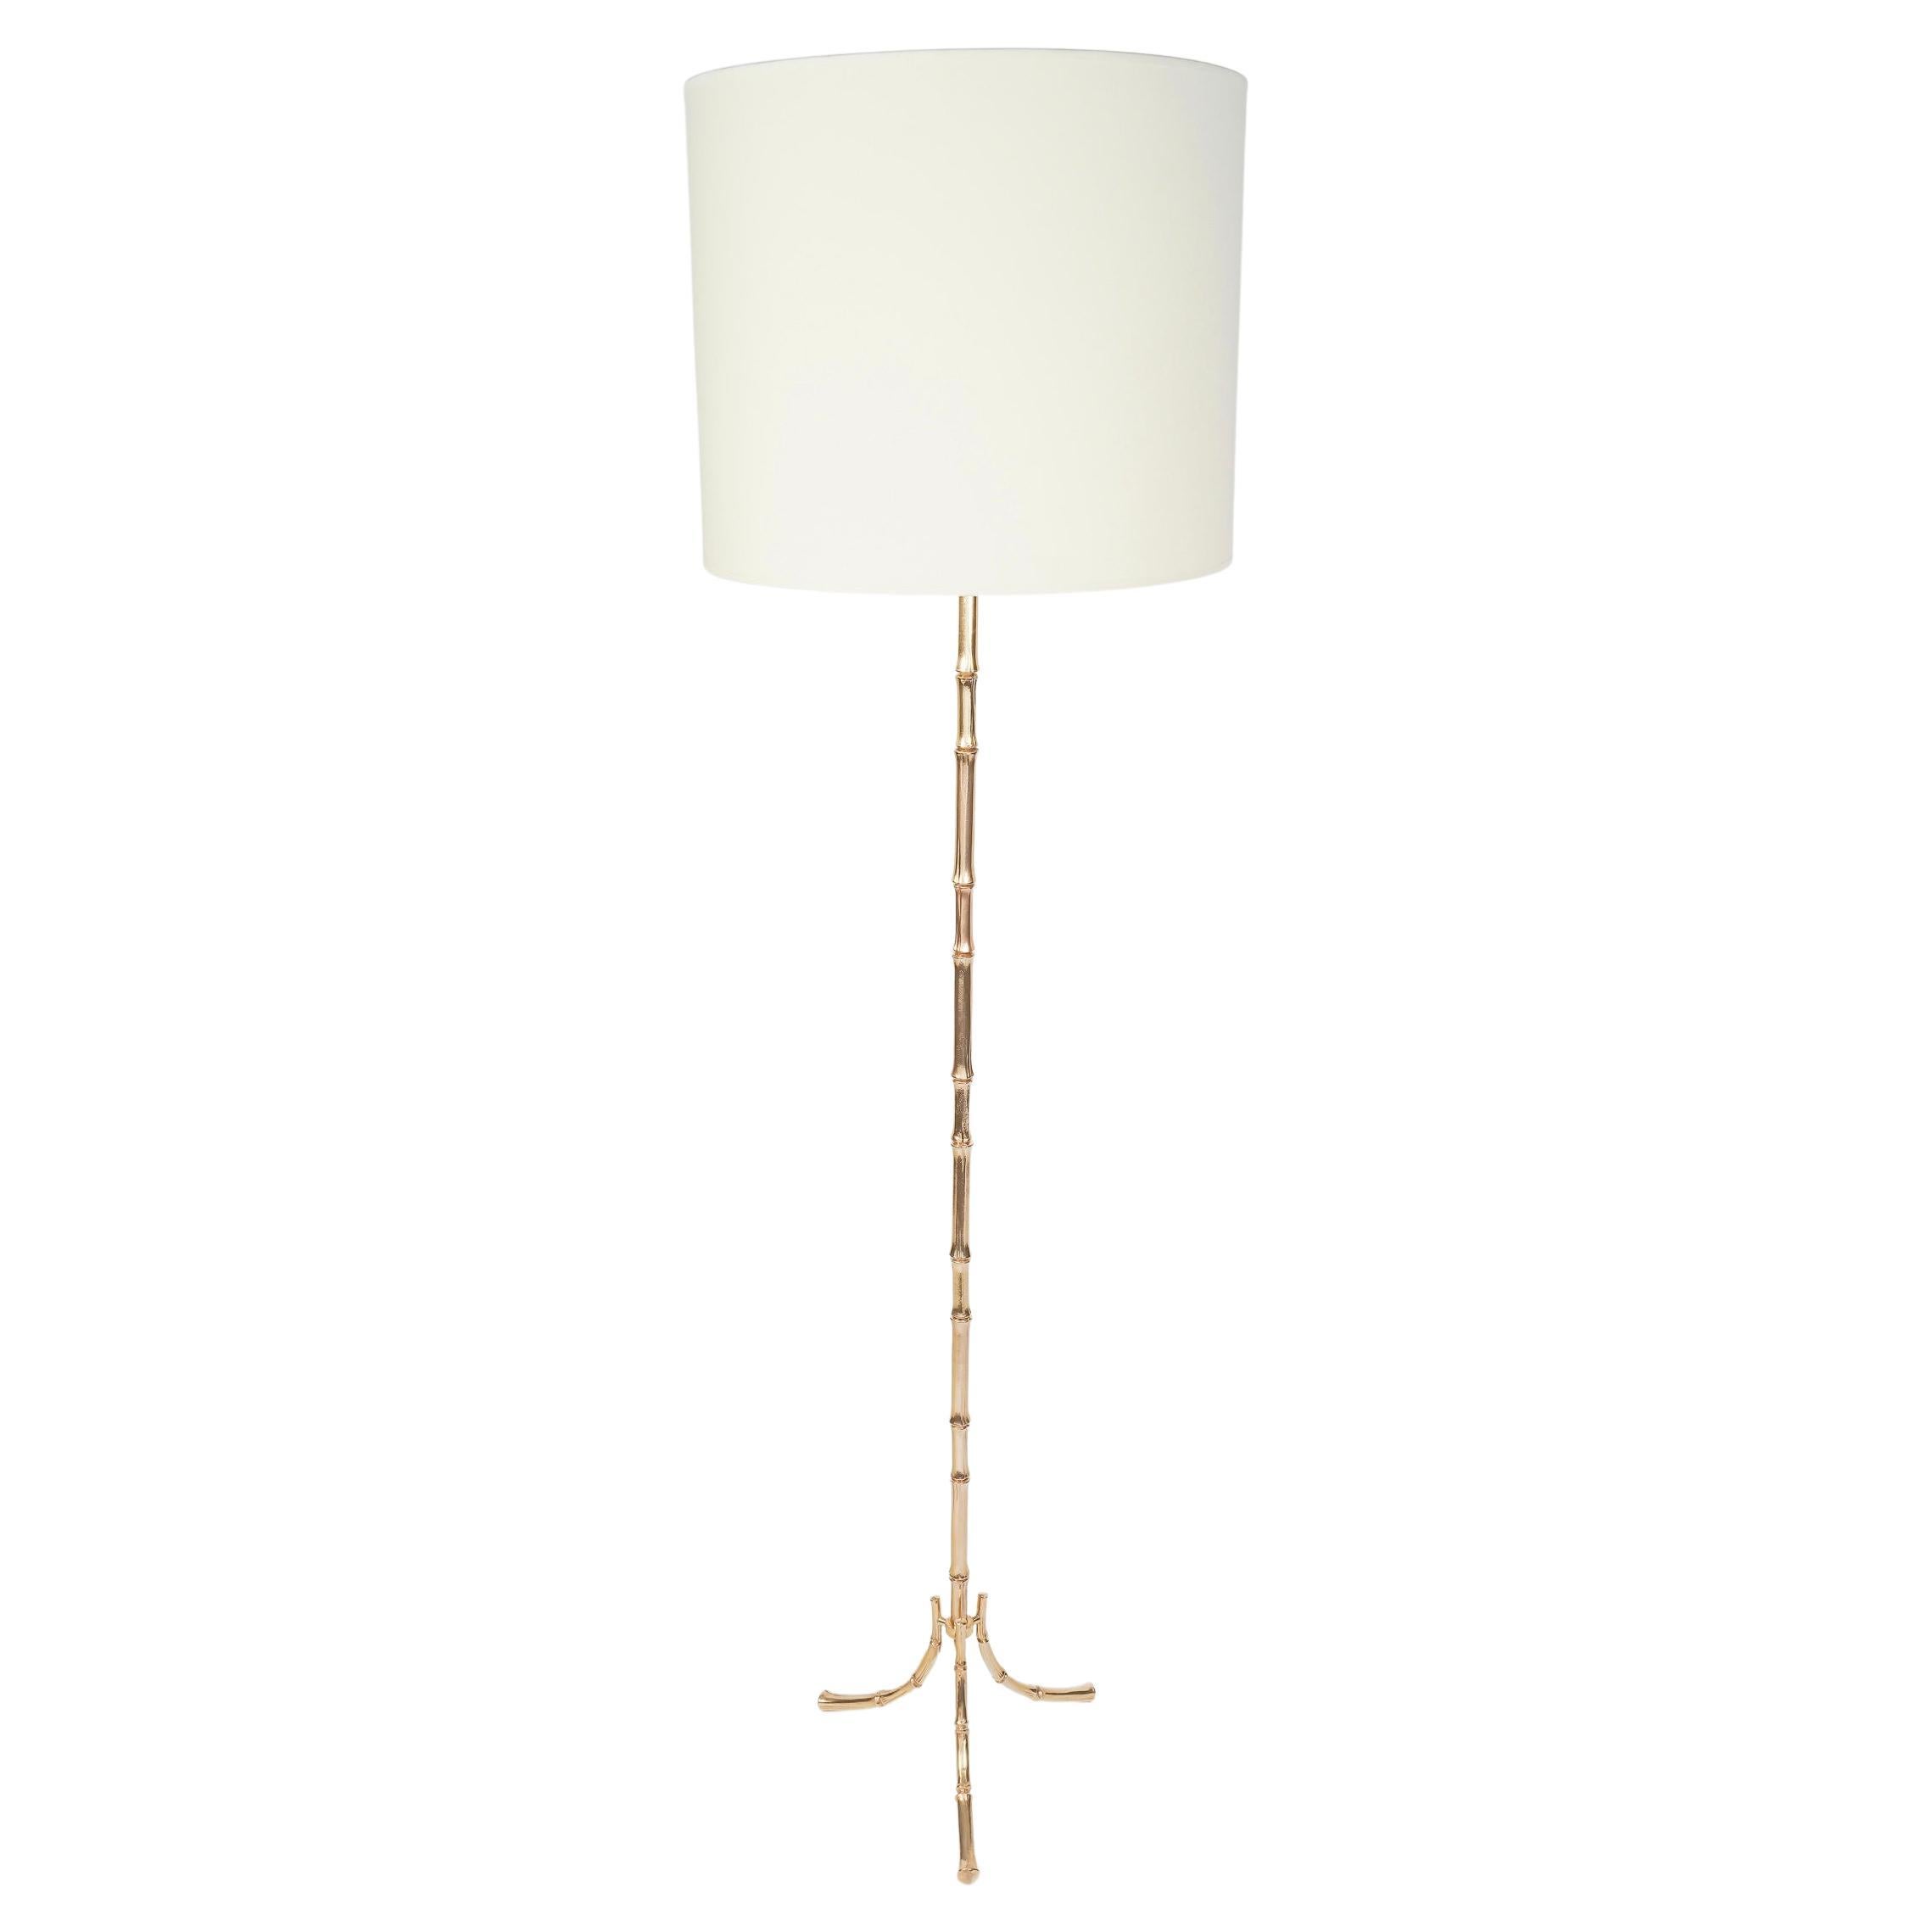 Pair of ormolu floor lamps Maison Baguès

Composed of a central stem resting on a tripod composed of 3 feet, all in gilded bronze, bamboo model.
The upper part of the base is covered with a cylindrical shade in off-white cotton.

1 light per